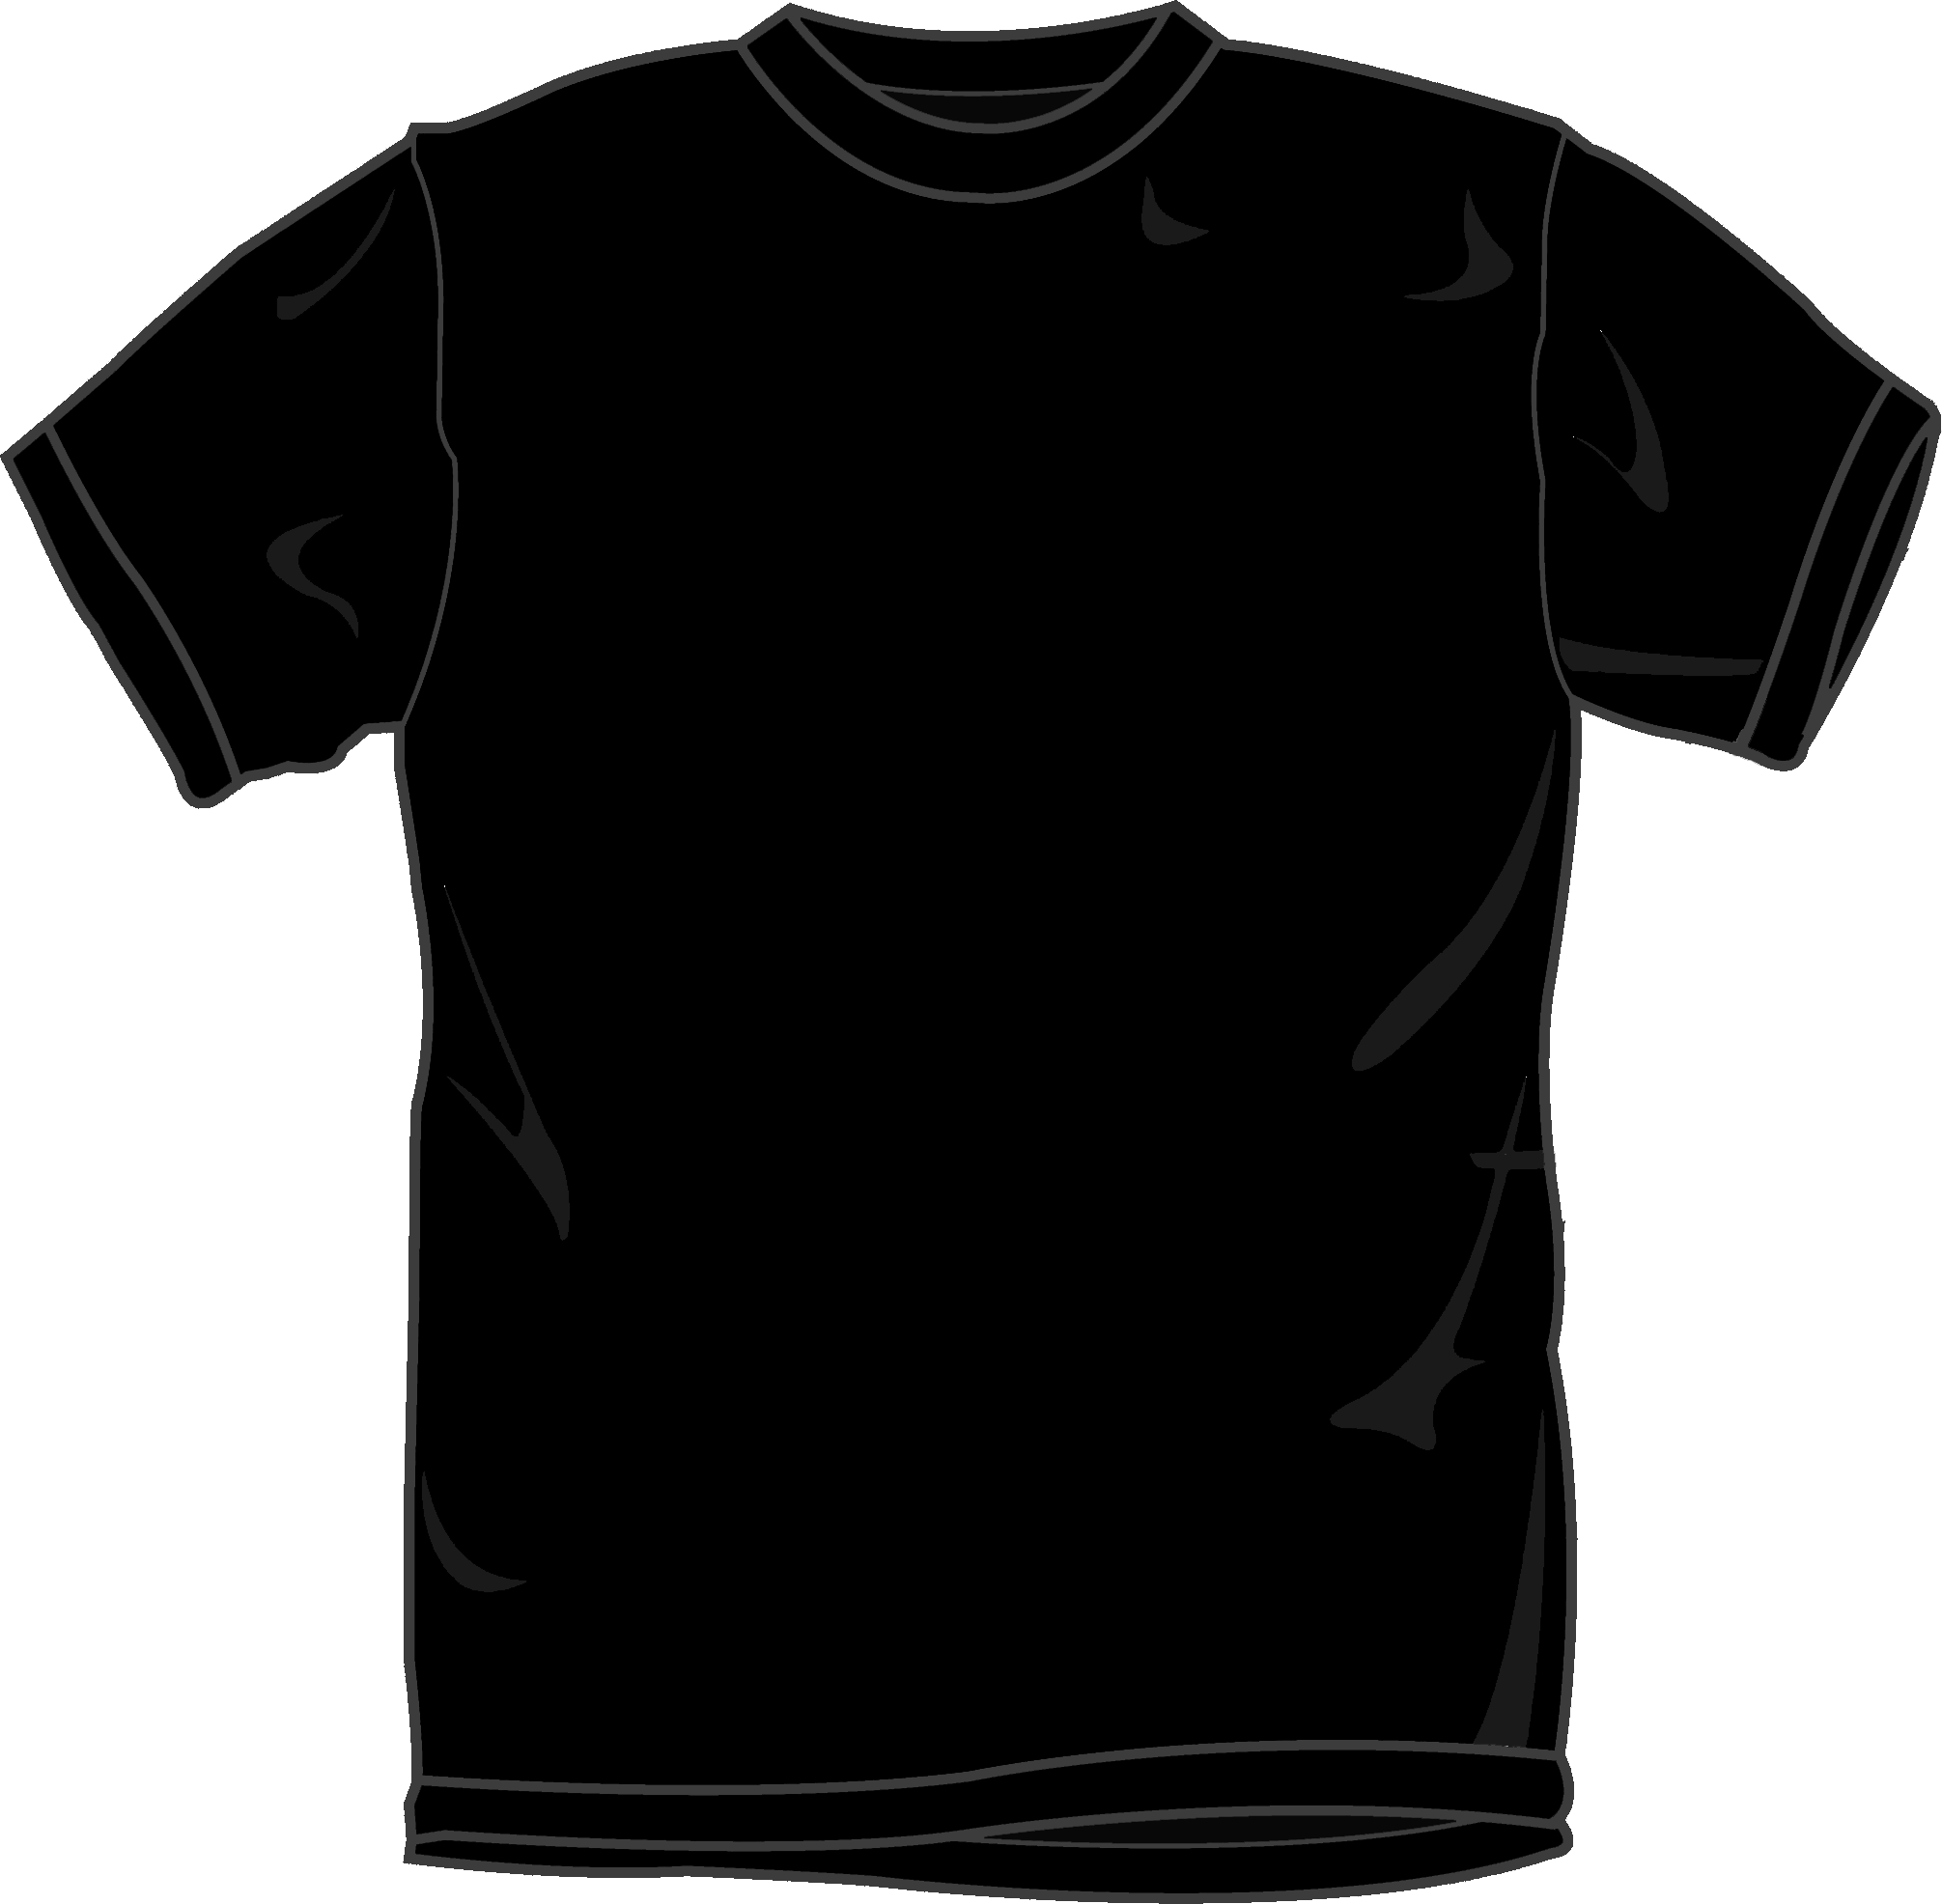 Black Shirt Front And Back Template